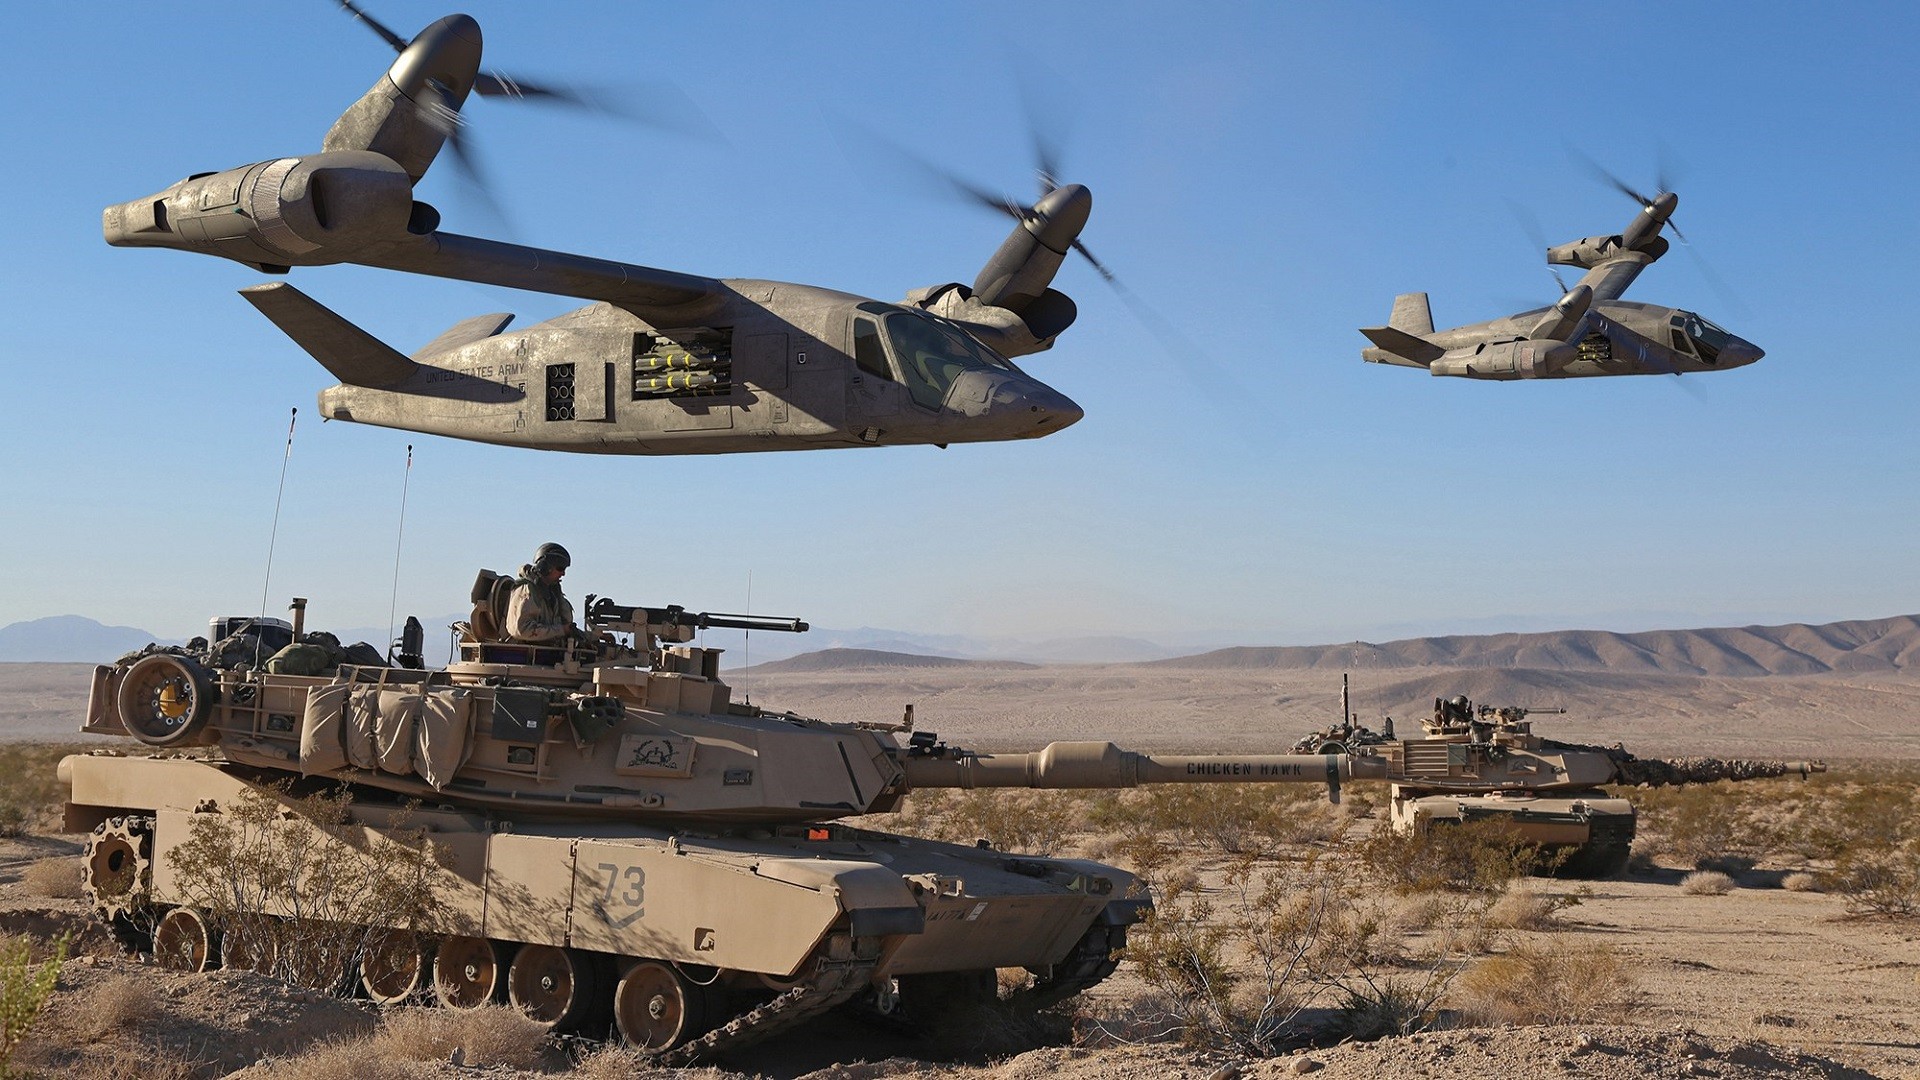 General 1920x1080 tank helicopters military desert M1 Abrams United States Army concept art